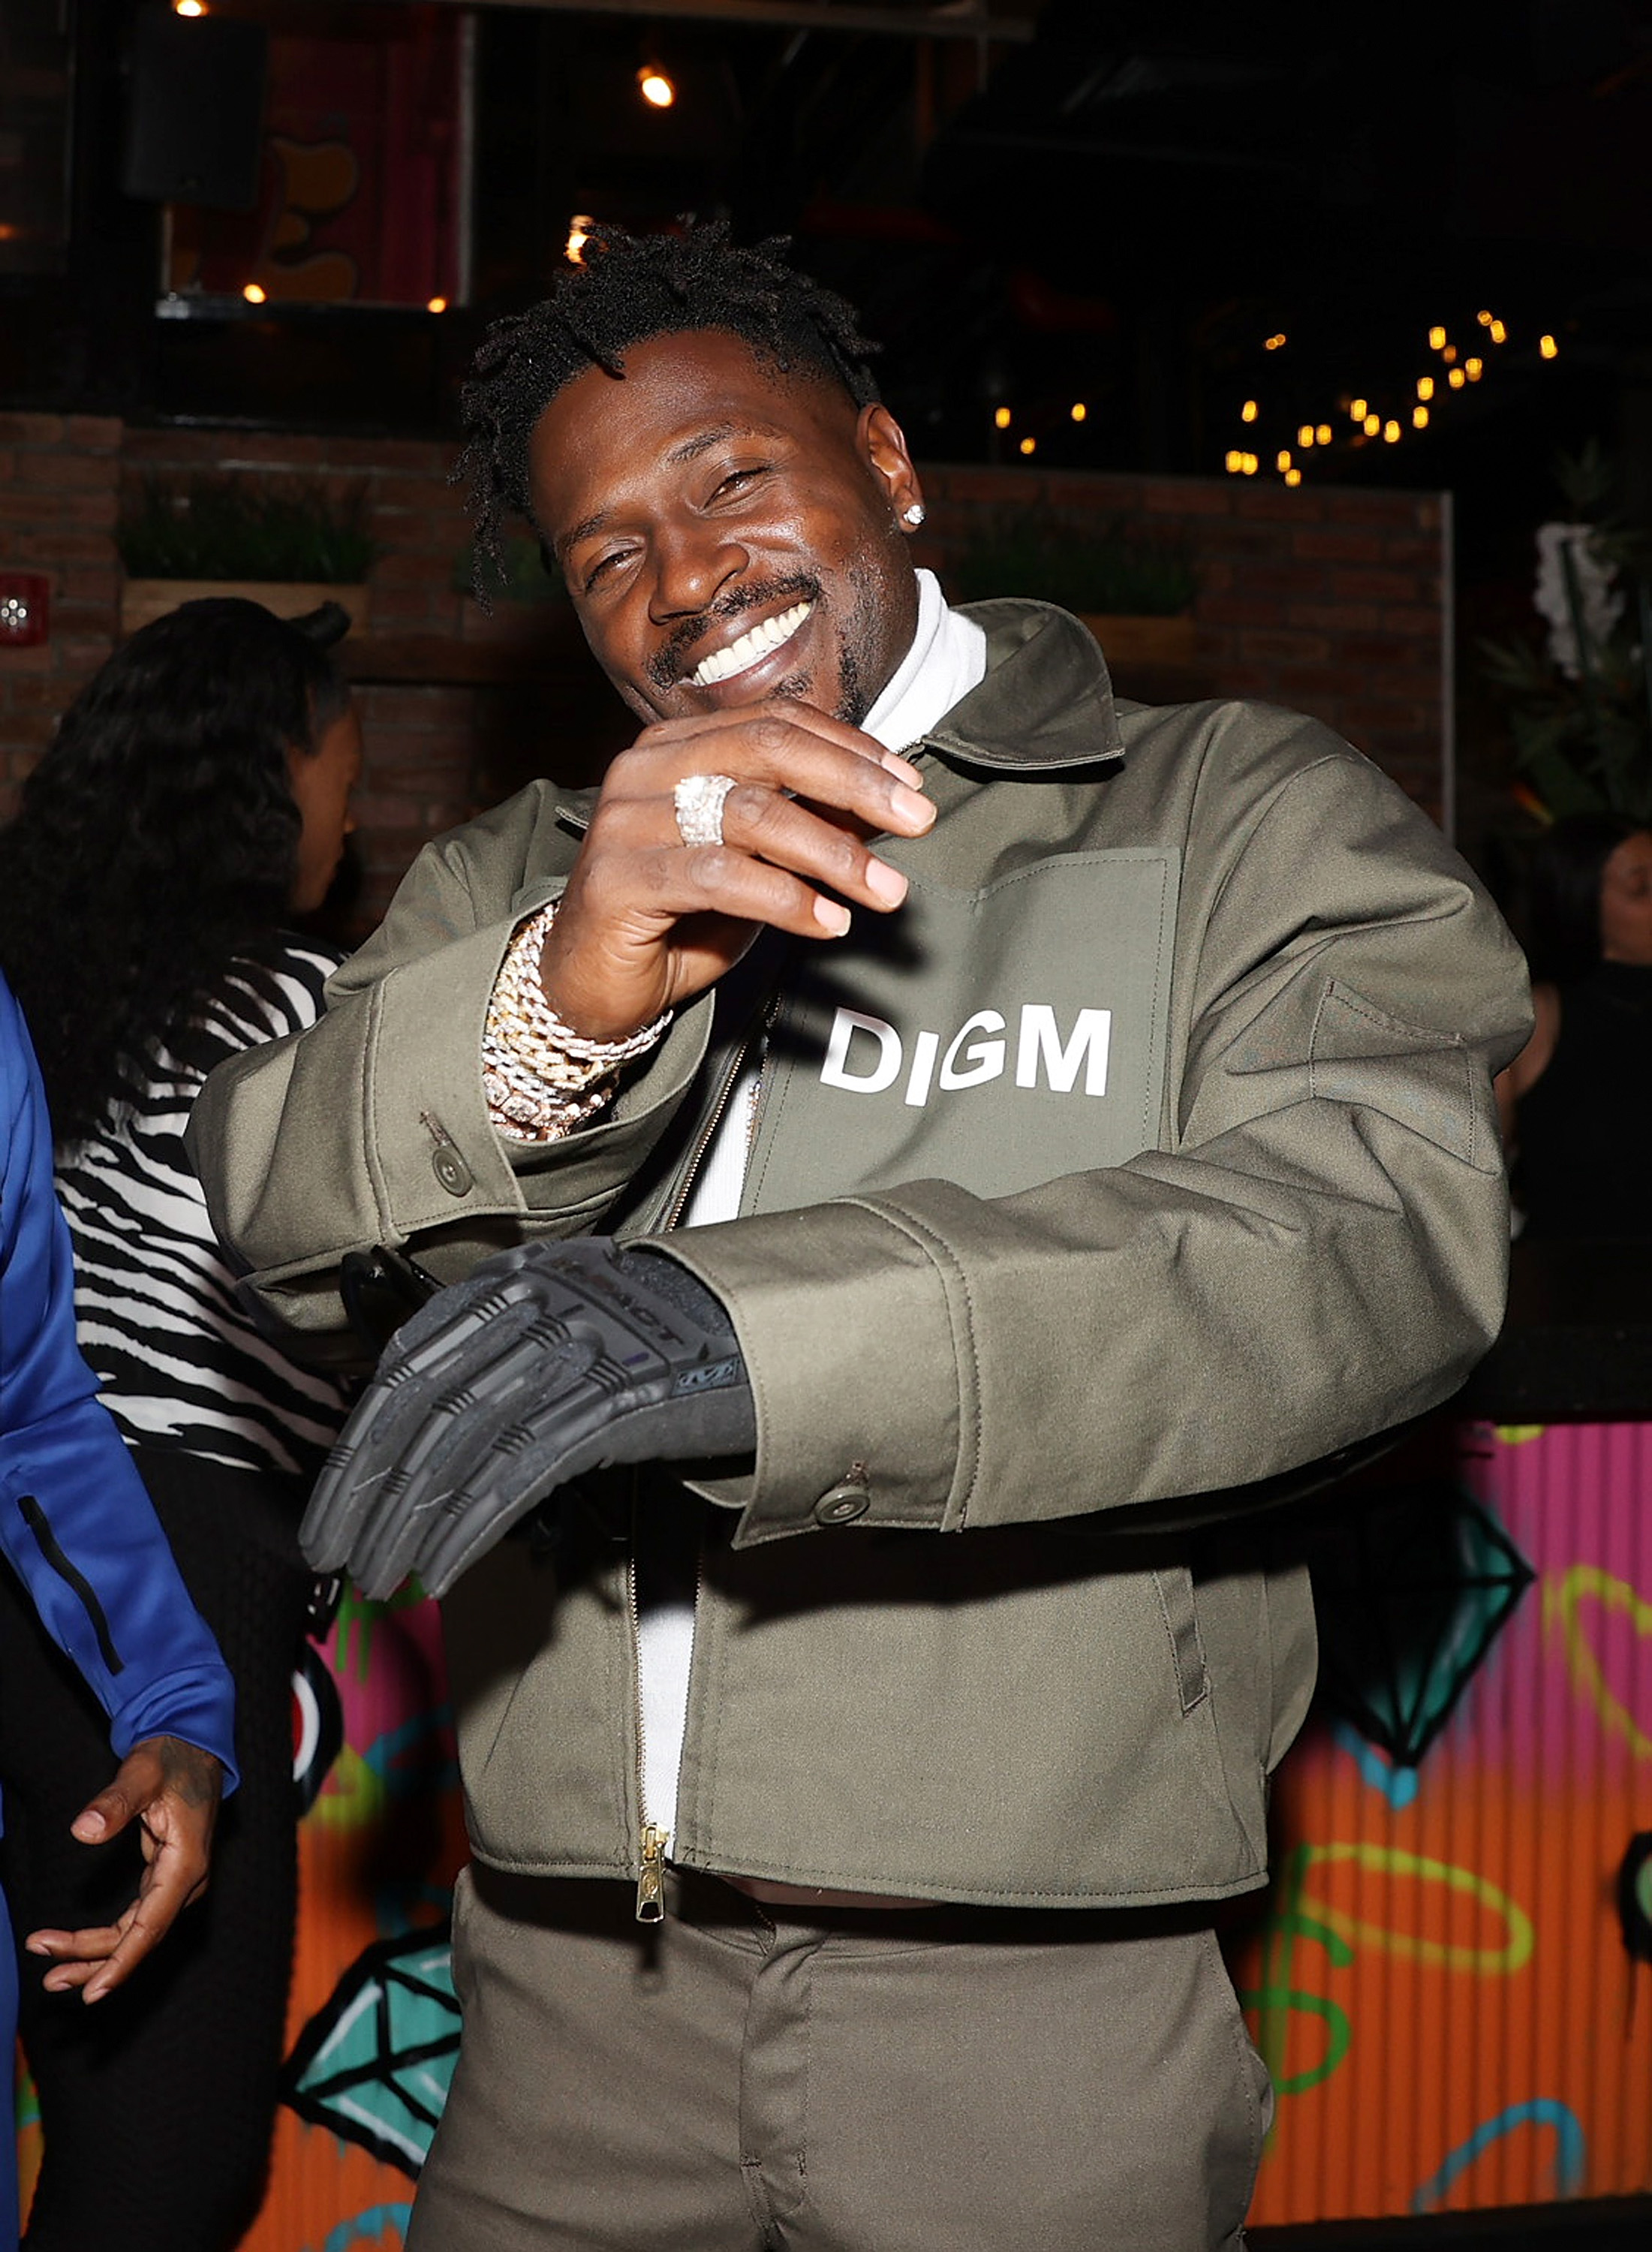 Antonio Brown at his album release dinner on April 28, 2022, in New York City. | Source: Getty Images